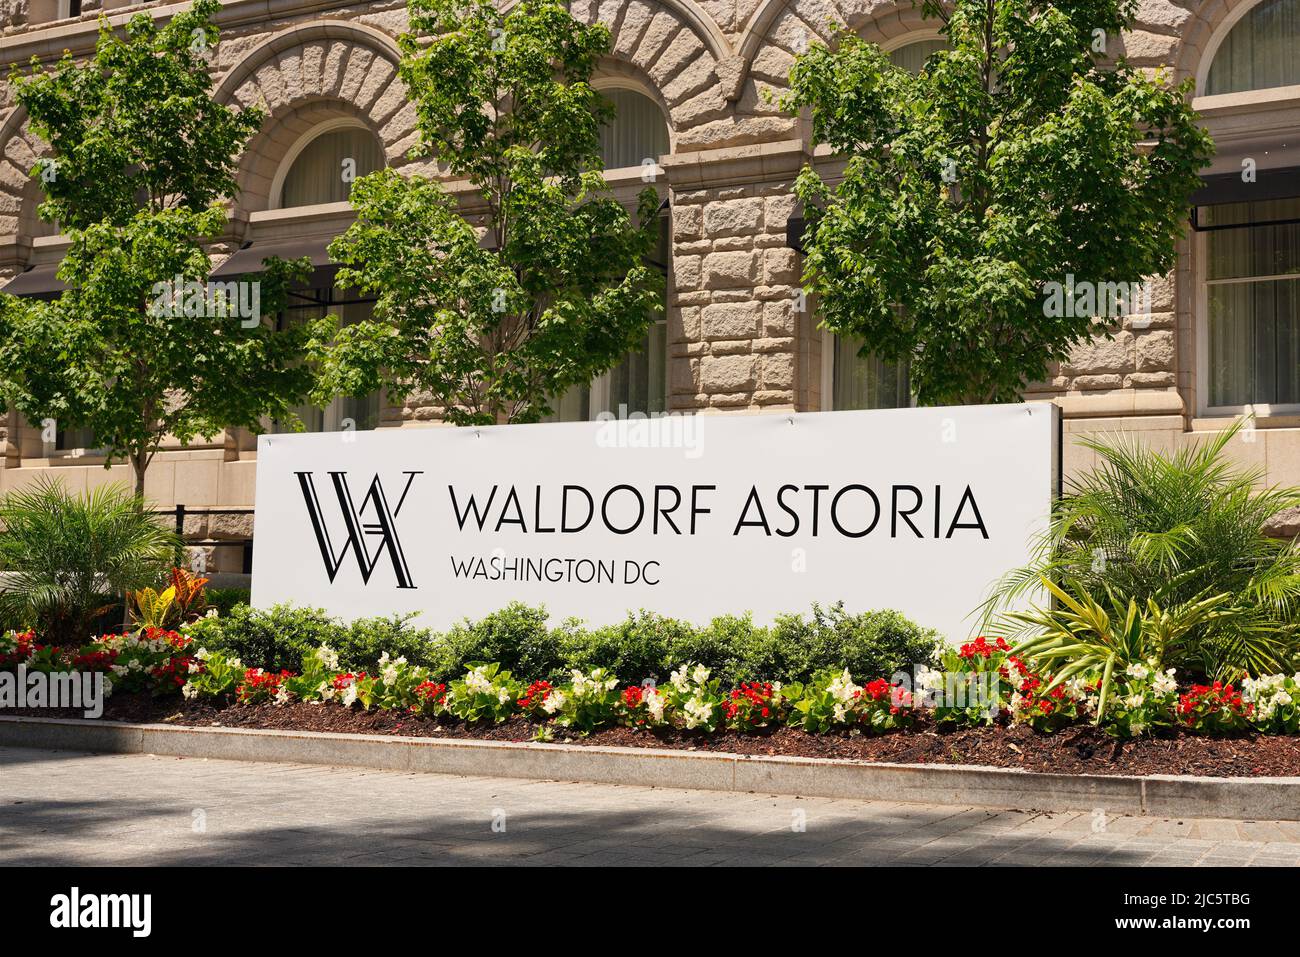 Waldorf Astoria Hotel in downtown Washington, D.C., USA. June 01, 2022 new opening of the 5 star luxury hotel Waldorf Astoria, the former Trump Hotel. Stock Photo